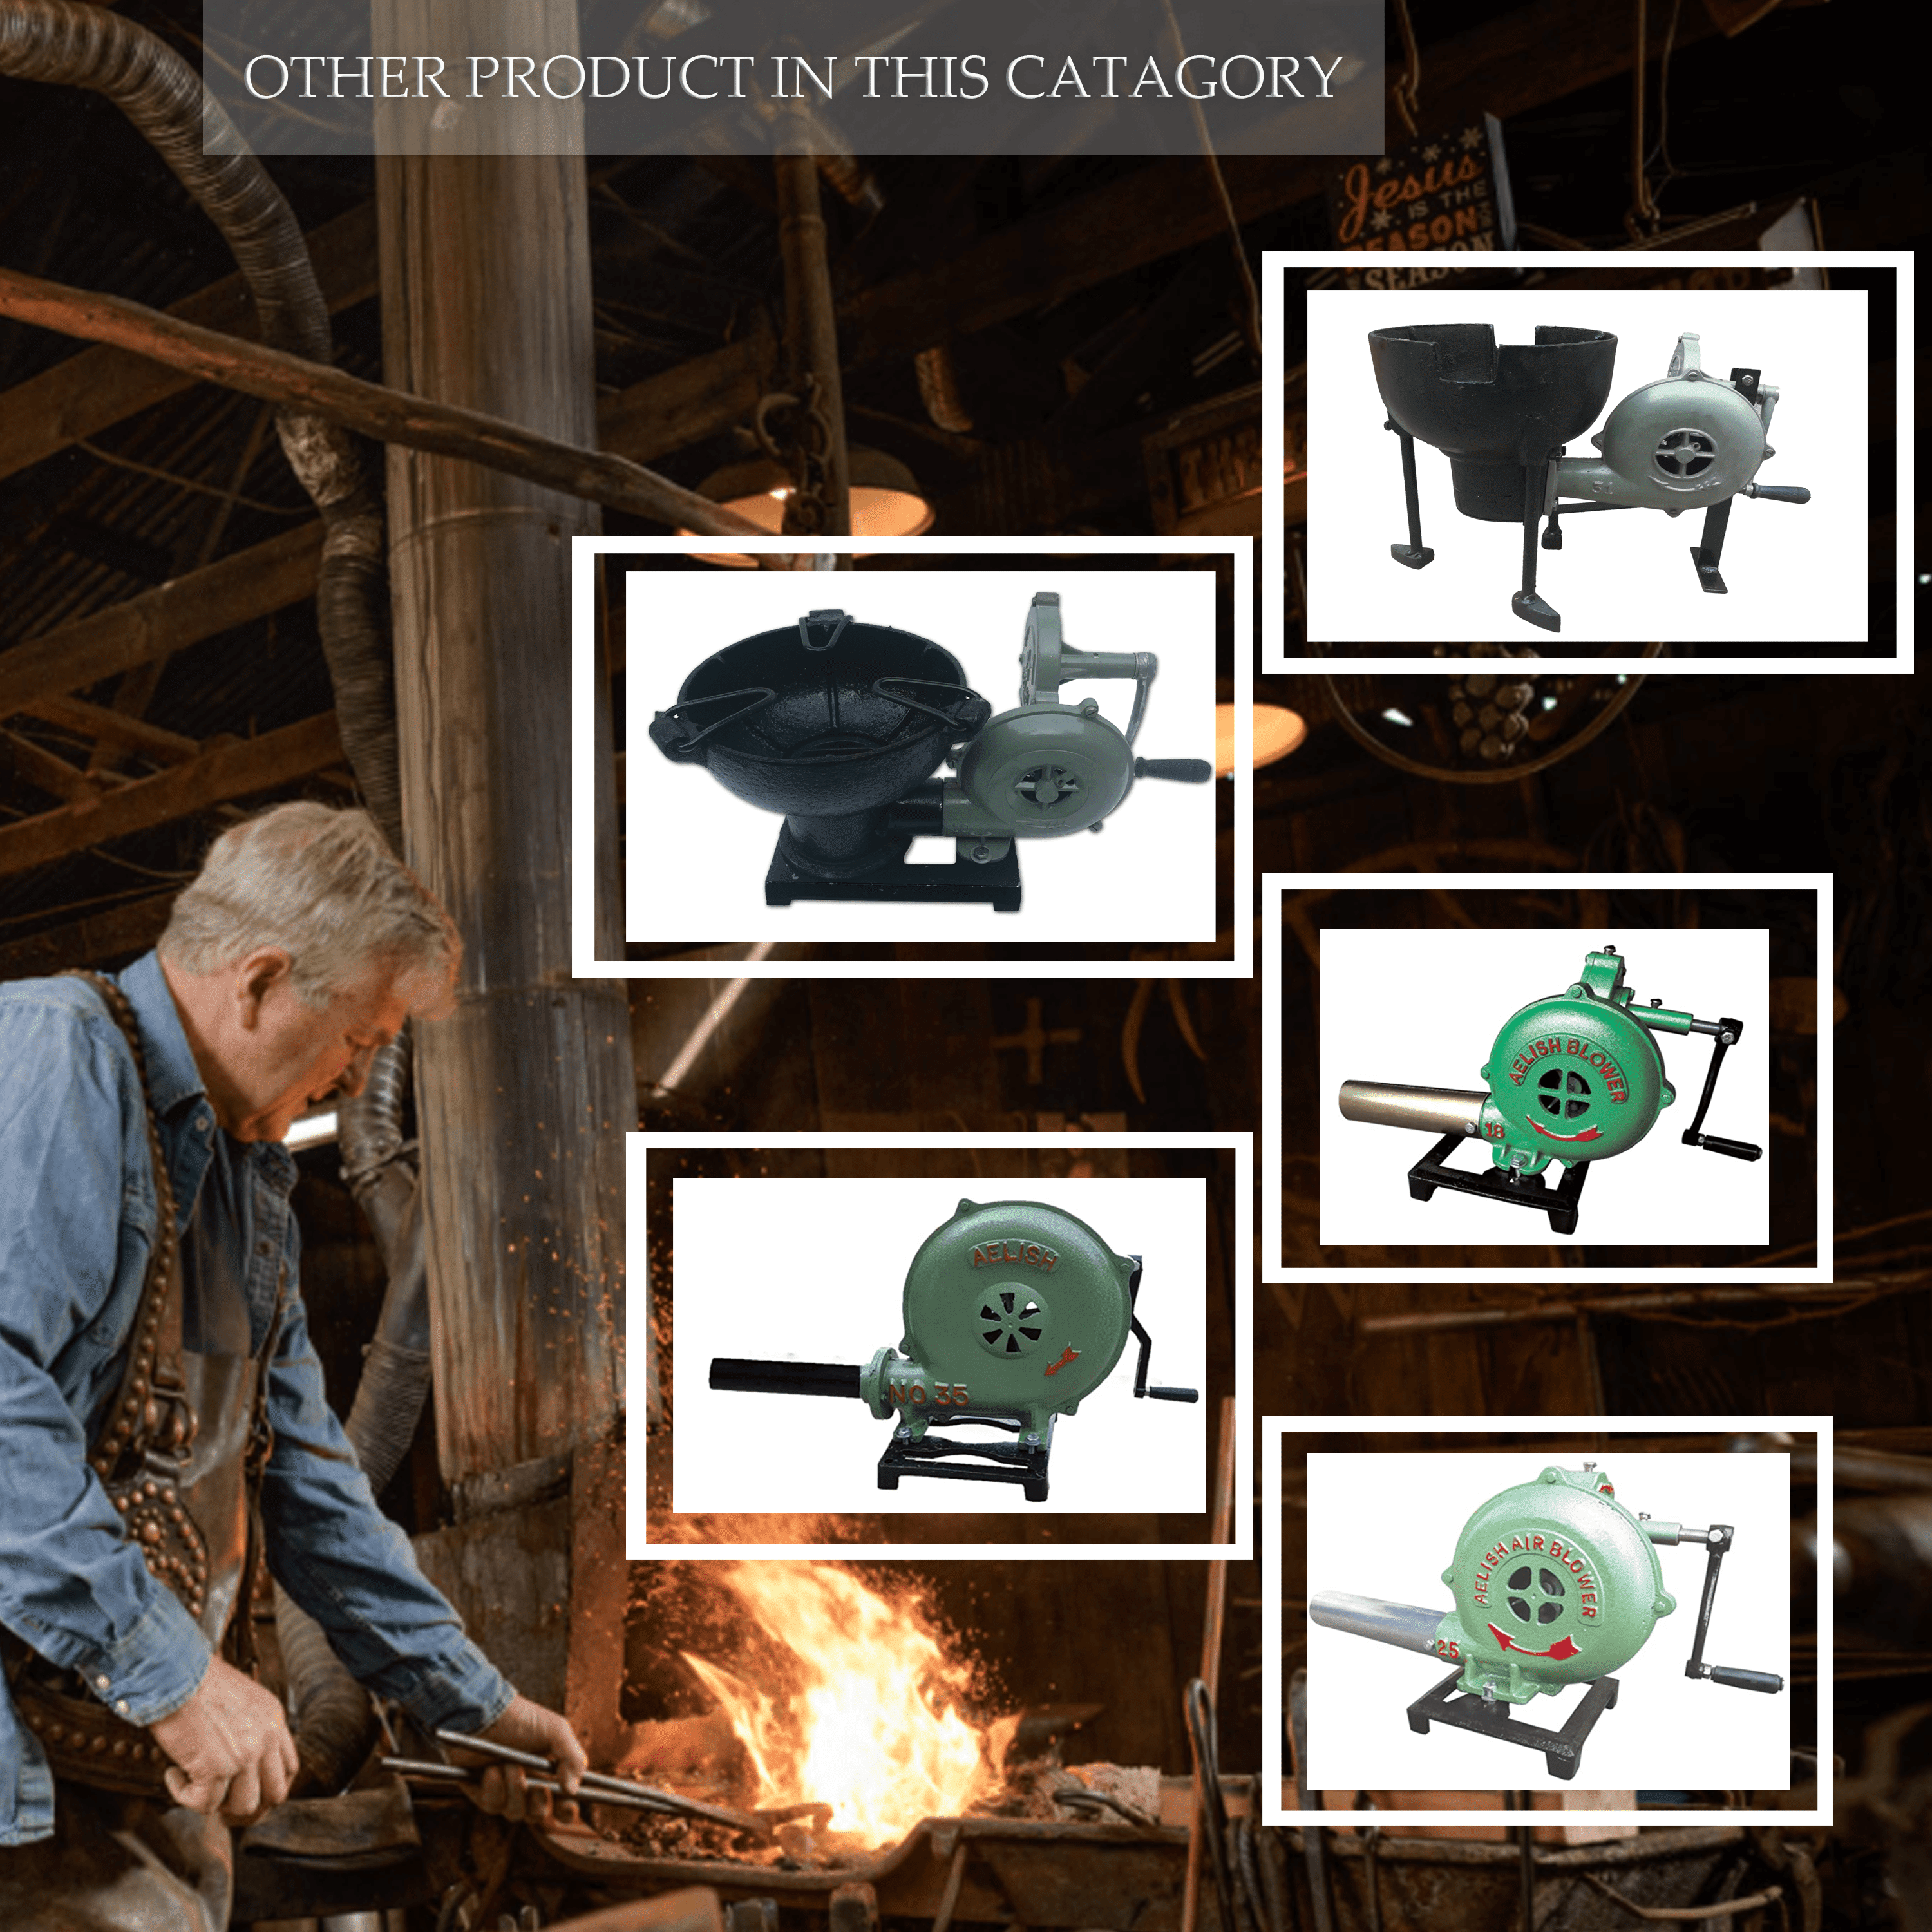 Blacksmith Vintage Style Coal Forge Furnace With Hand Blower Pedal